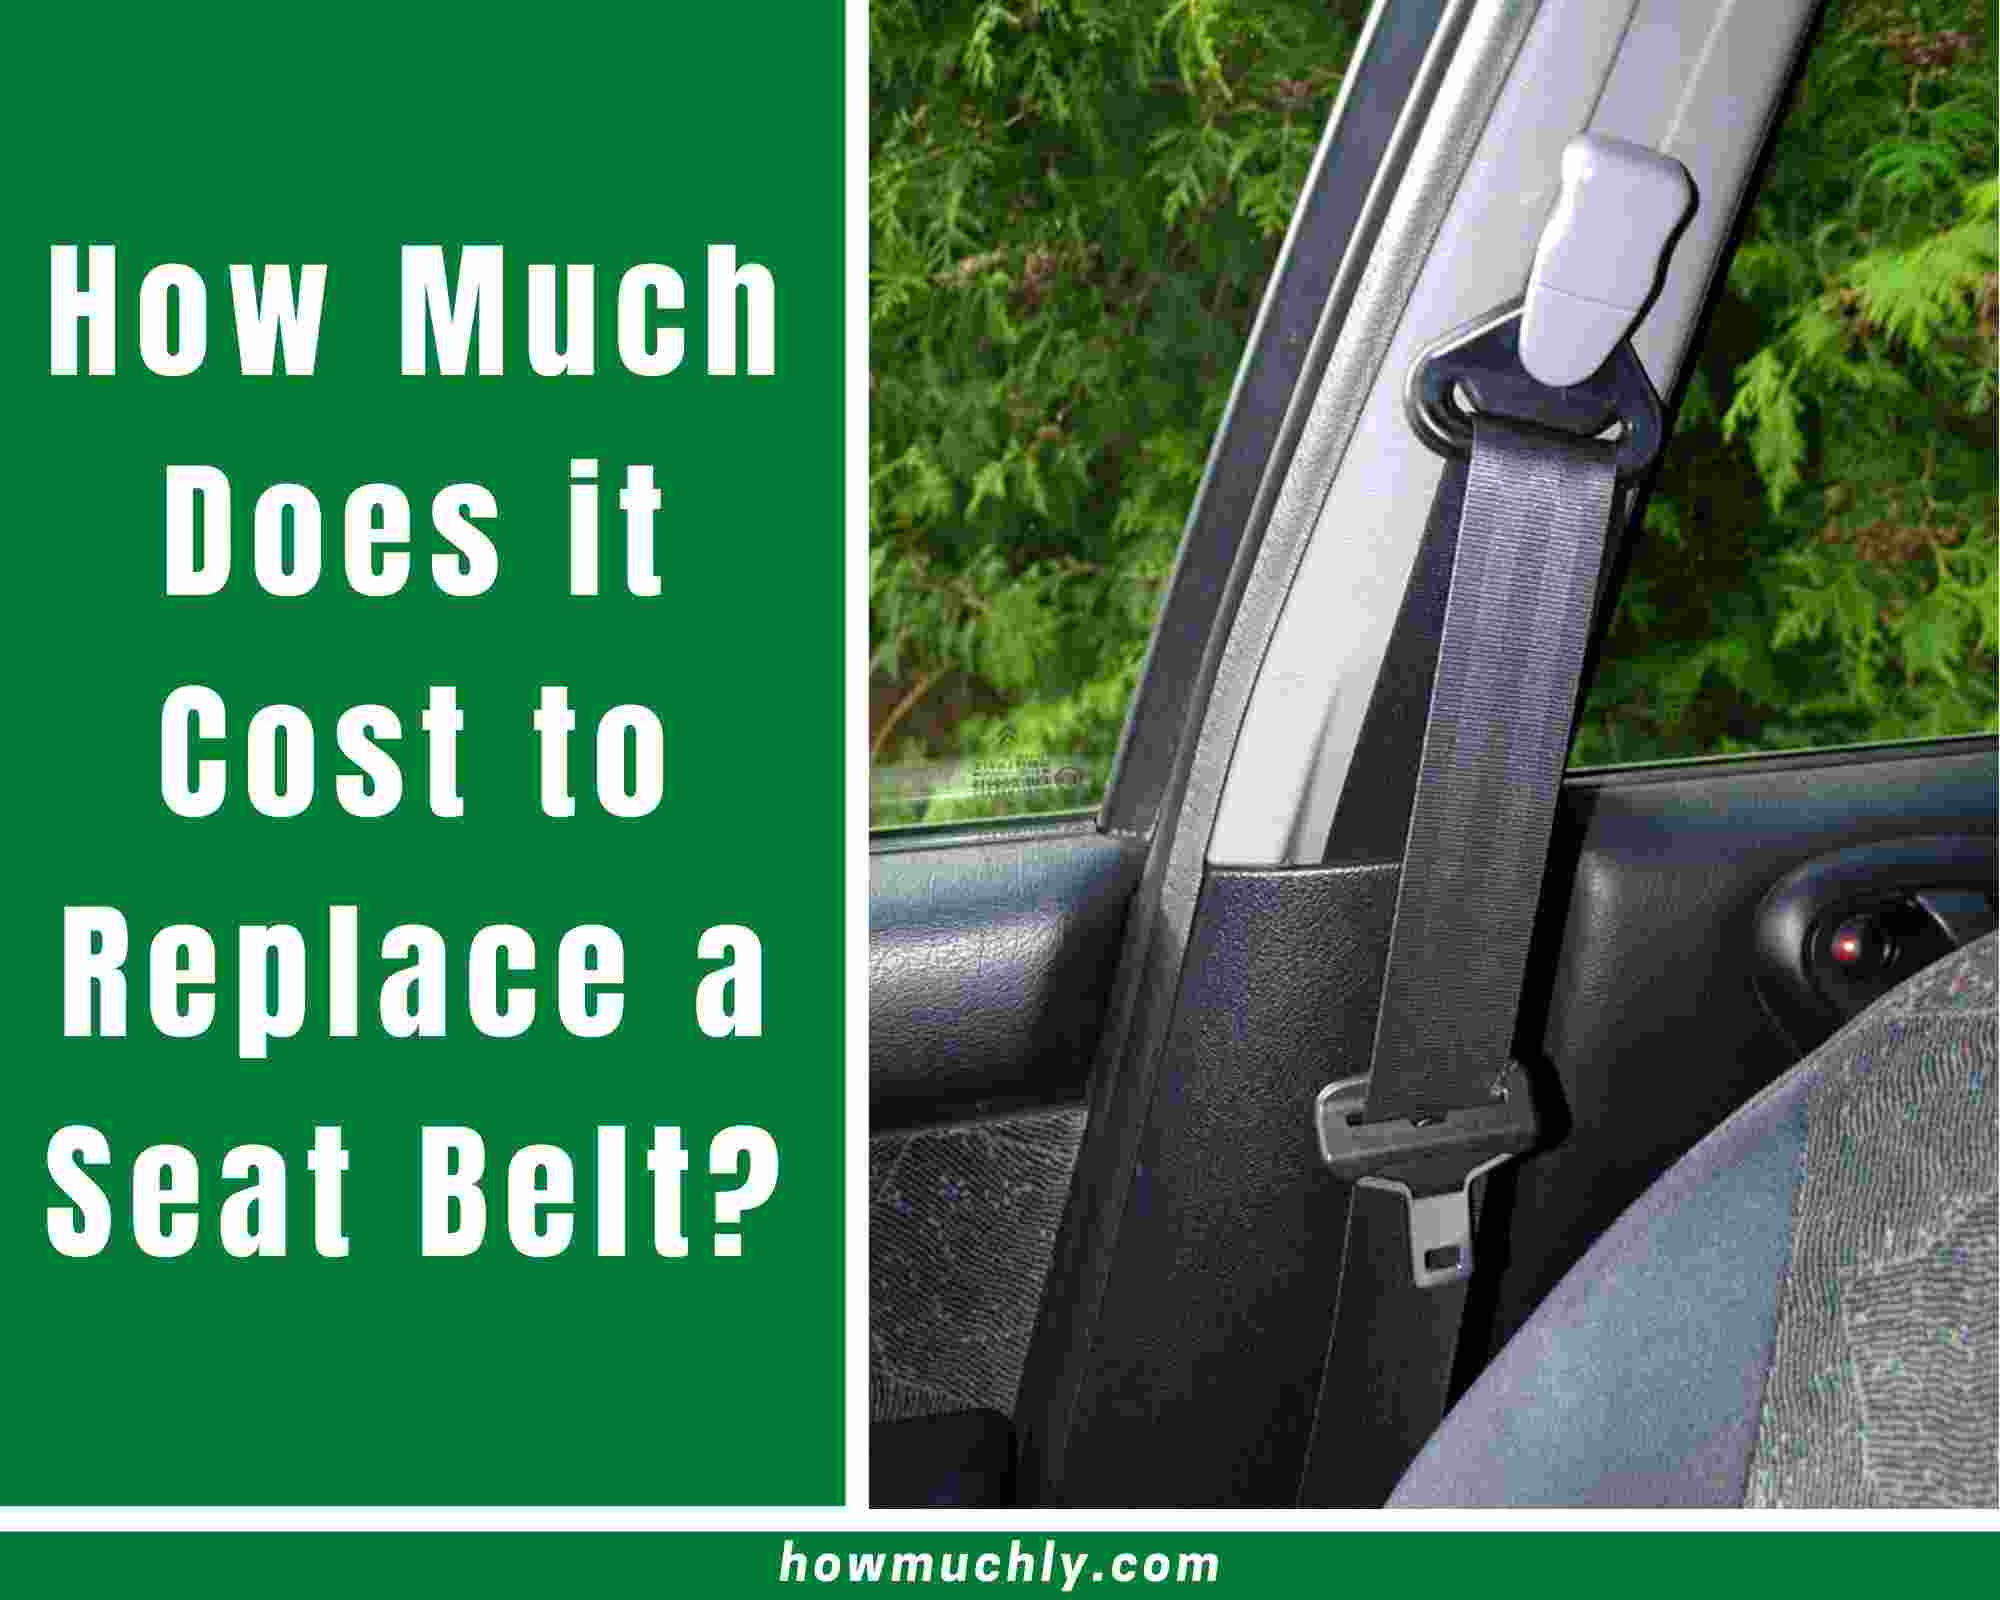 Cost To Replace A Seat Belt, How Much Does It Cost To Replace Car Seat Belts